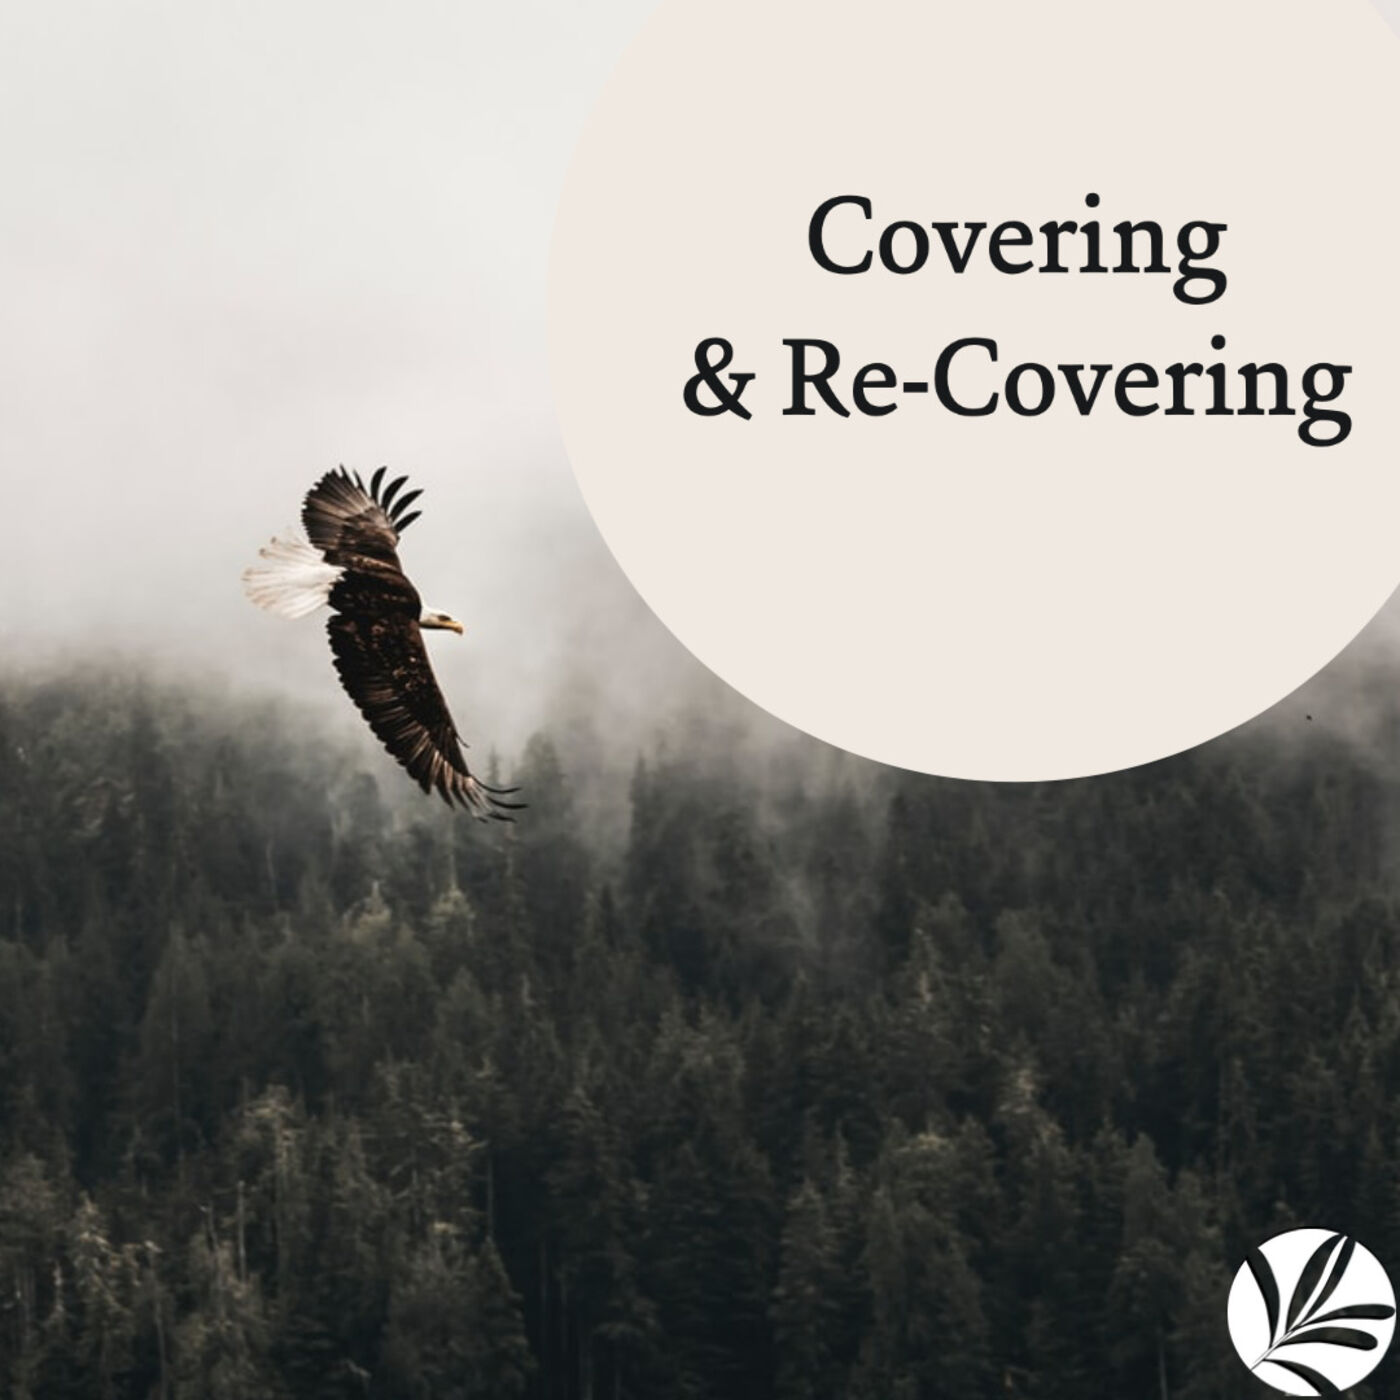 Covering & Re-Covering